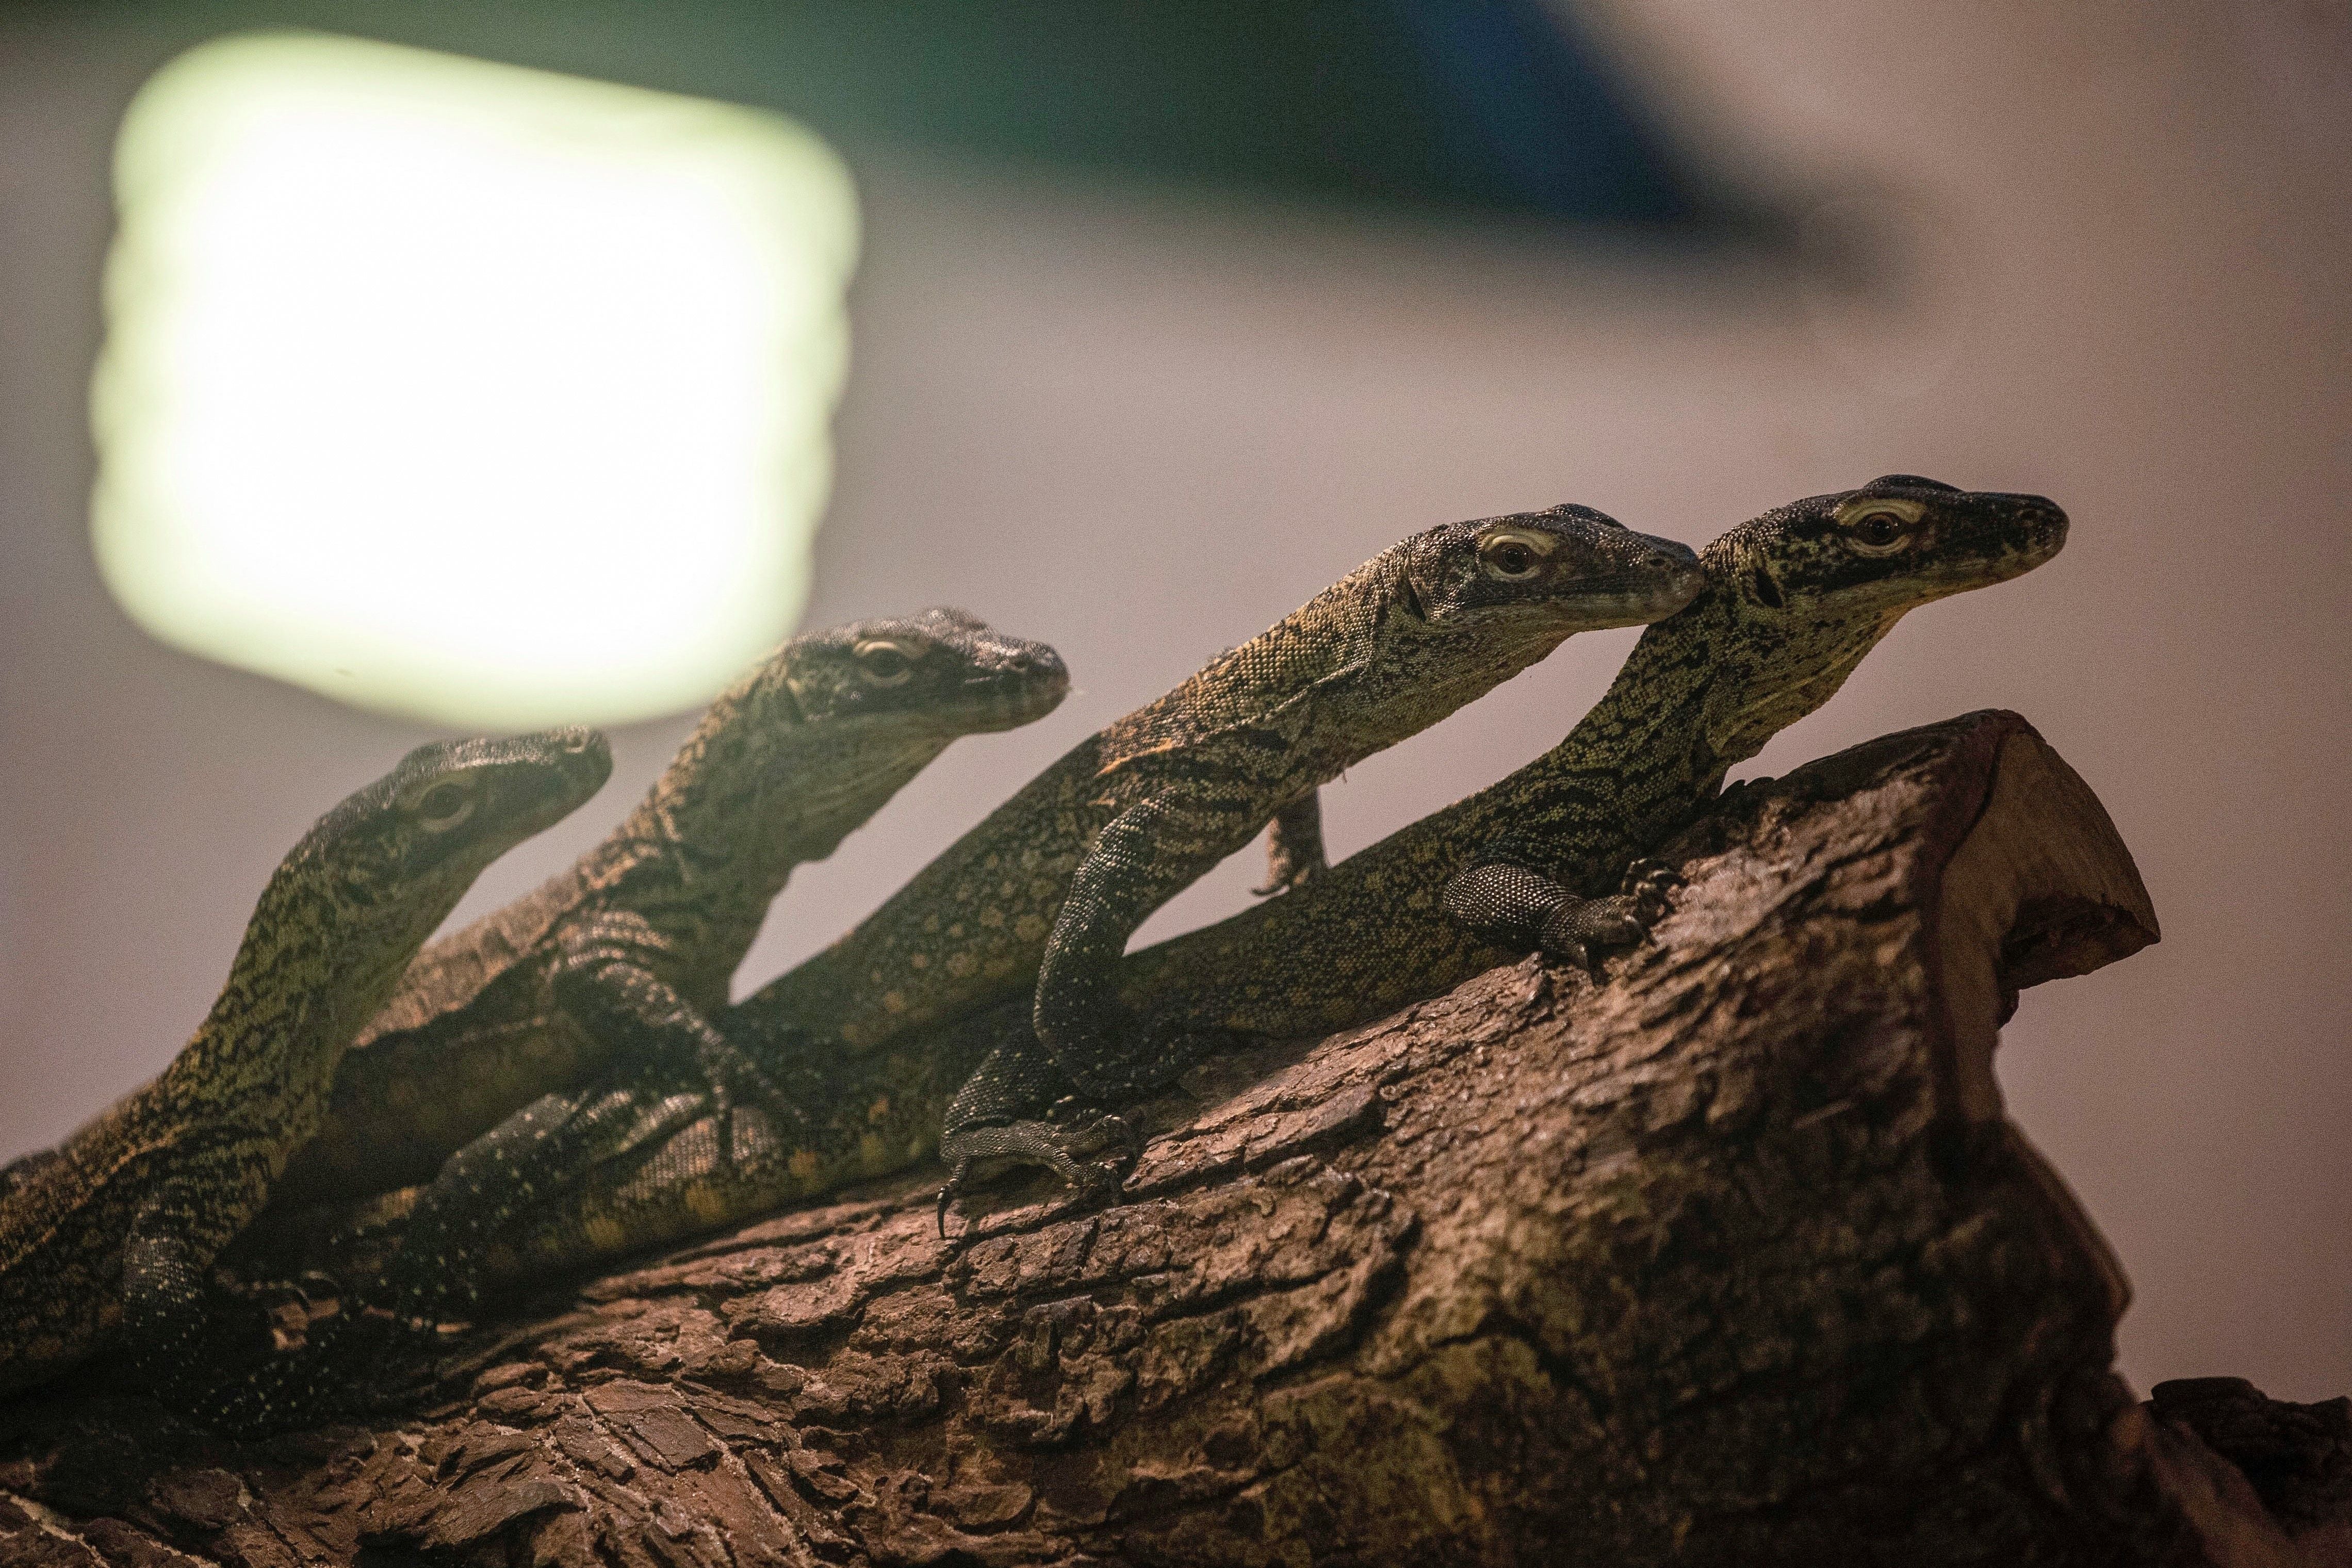 Four-month-old juvenile Komodo dragons, hatched in captivity as part of a breeding programme for the endangered lizard, are seen in their enclosure